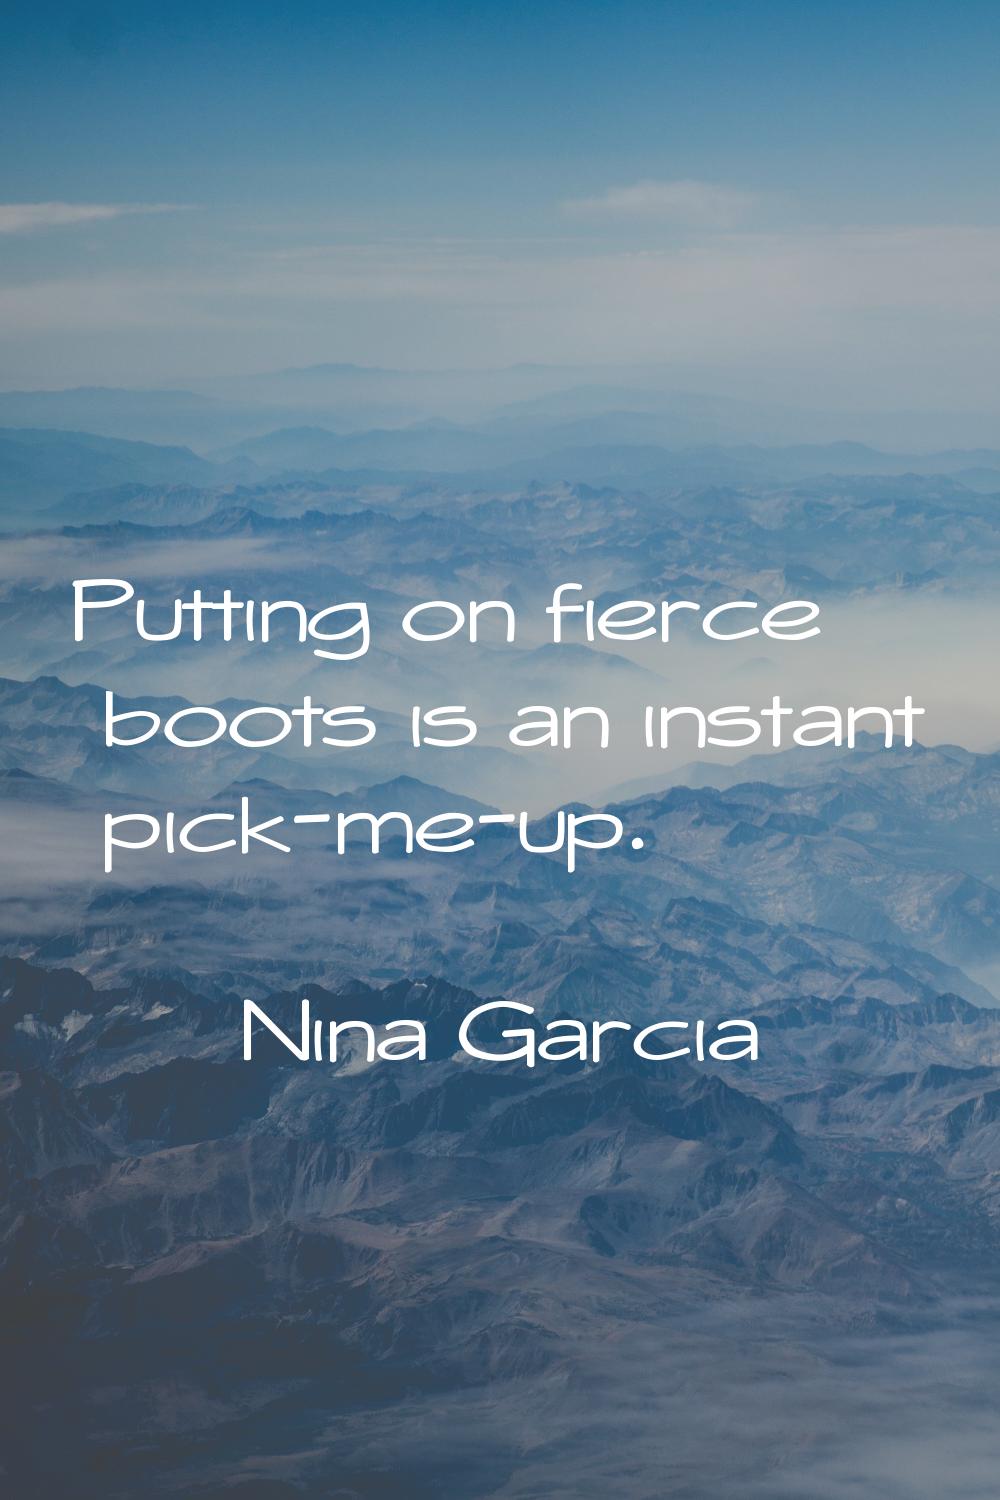 Putting on fierce boots is an instant pick-me-up.